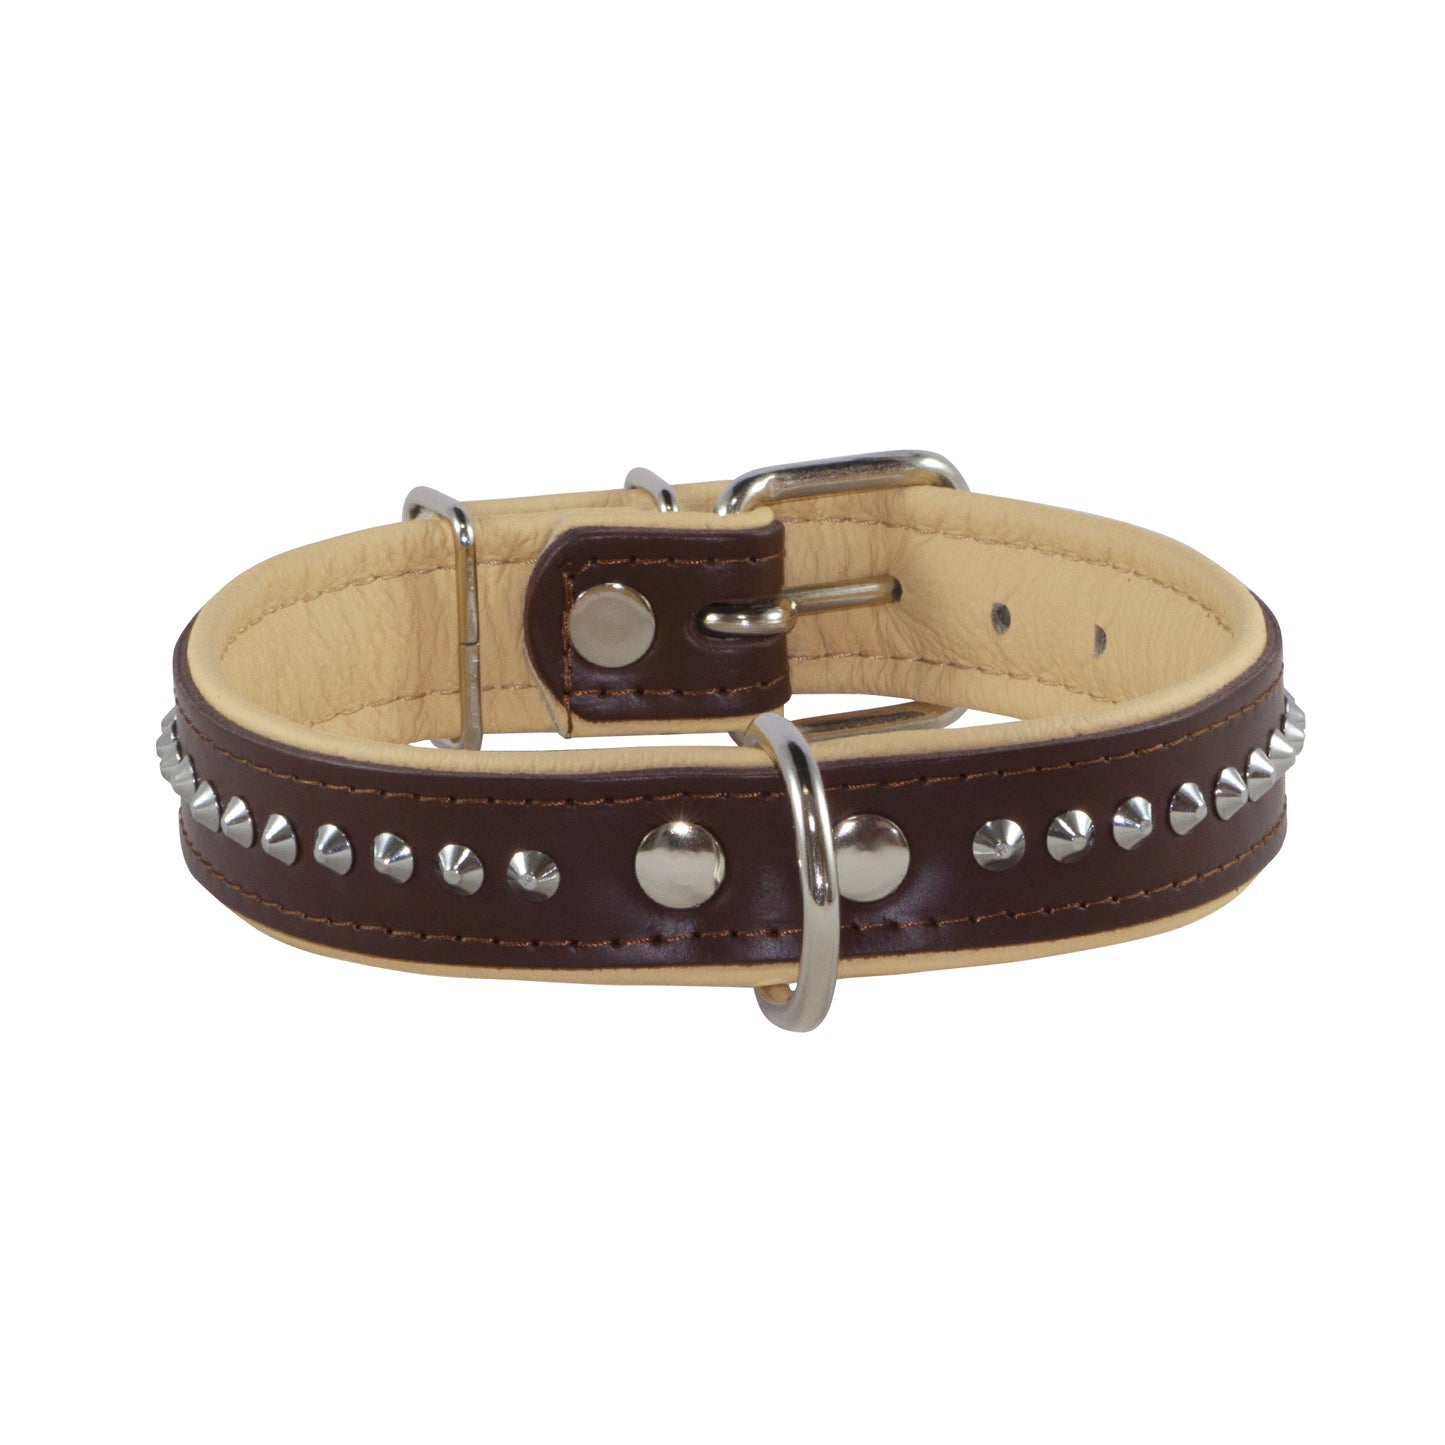 Corspet Full Grain Nappa Leather Dog Collar - Studded Leather with Silver Nickel Plated Hardware